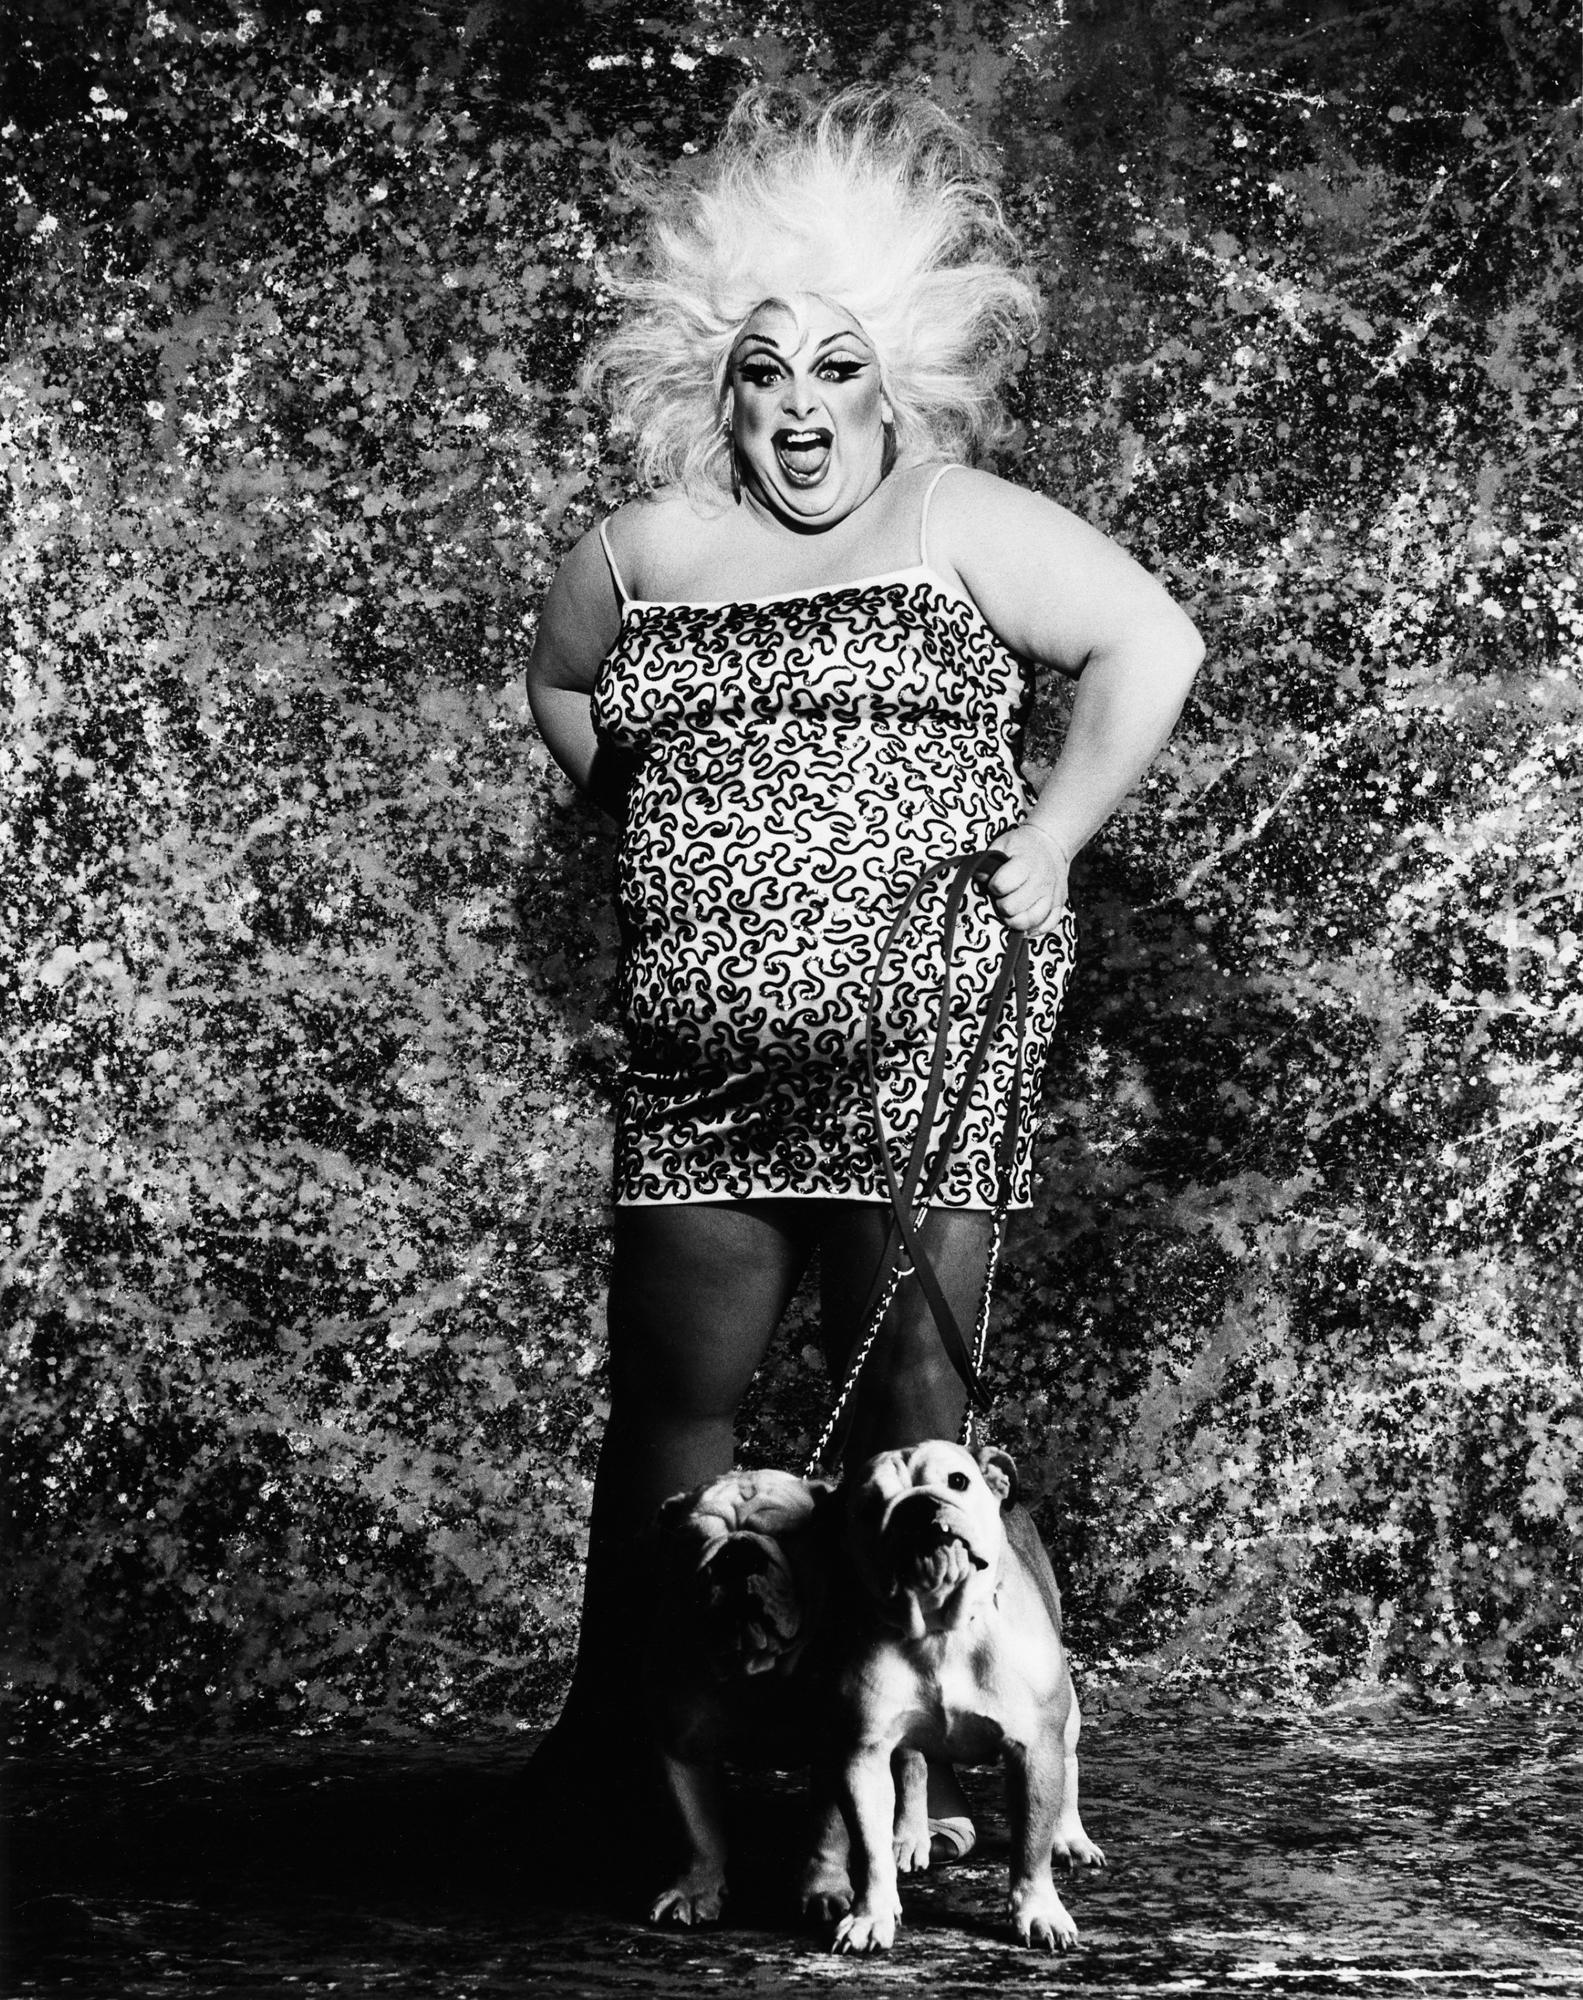 Greg Gorman Black and White Photograph - Divine and Bulldogs, 16x20, 21st Century, Contemporary, Celebrity, Photography